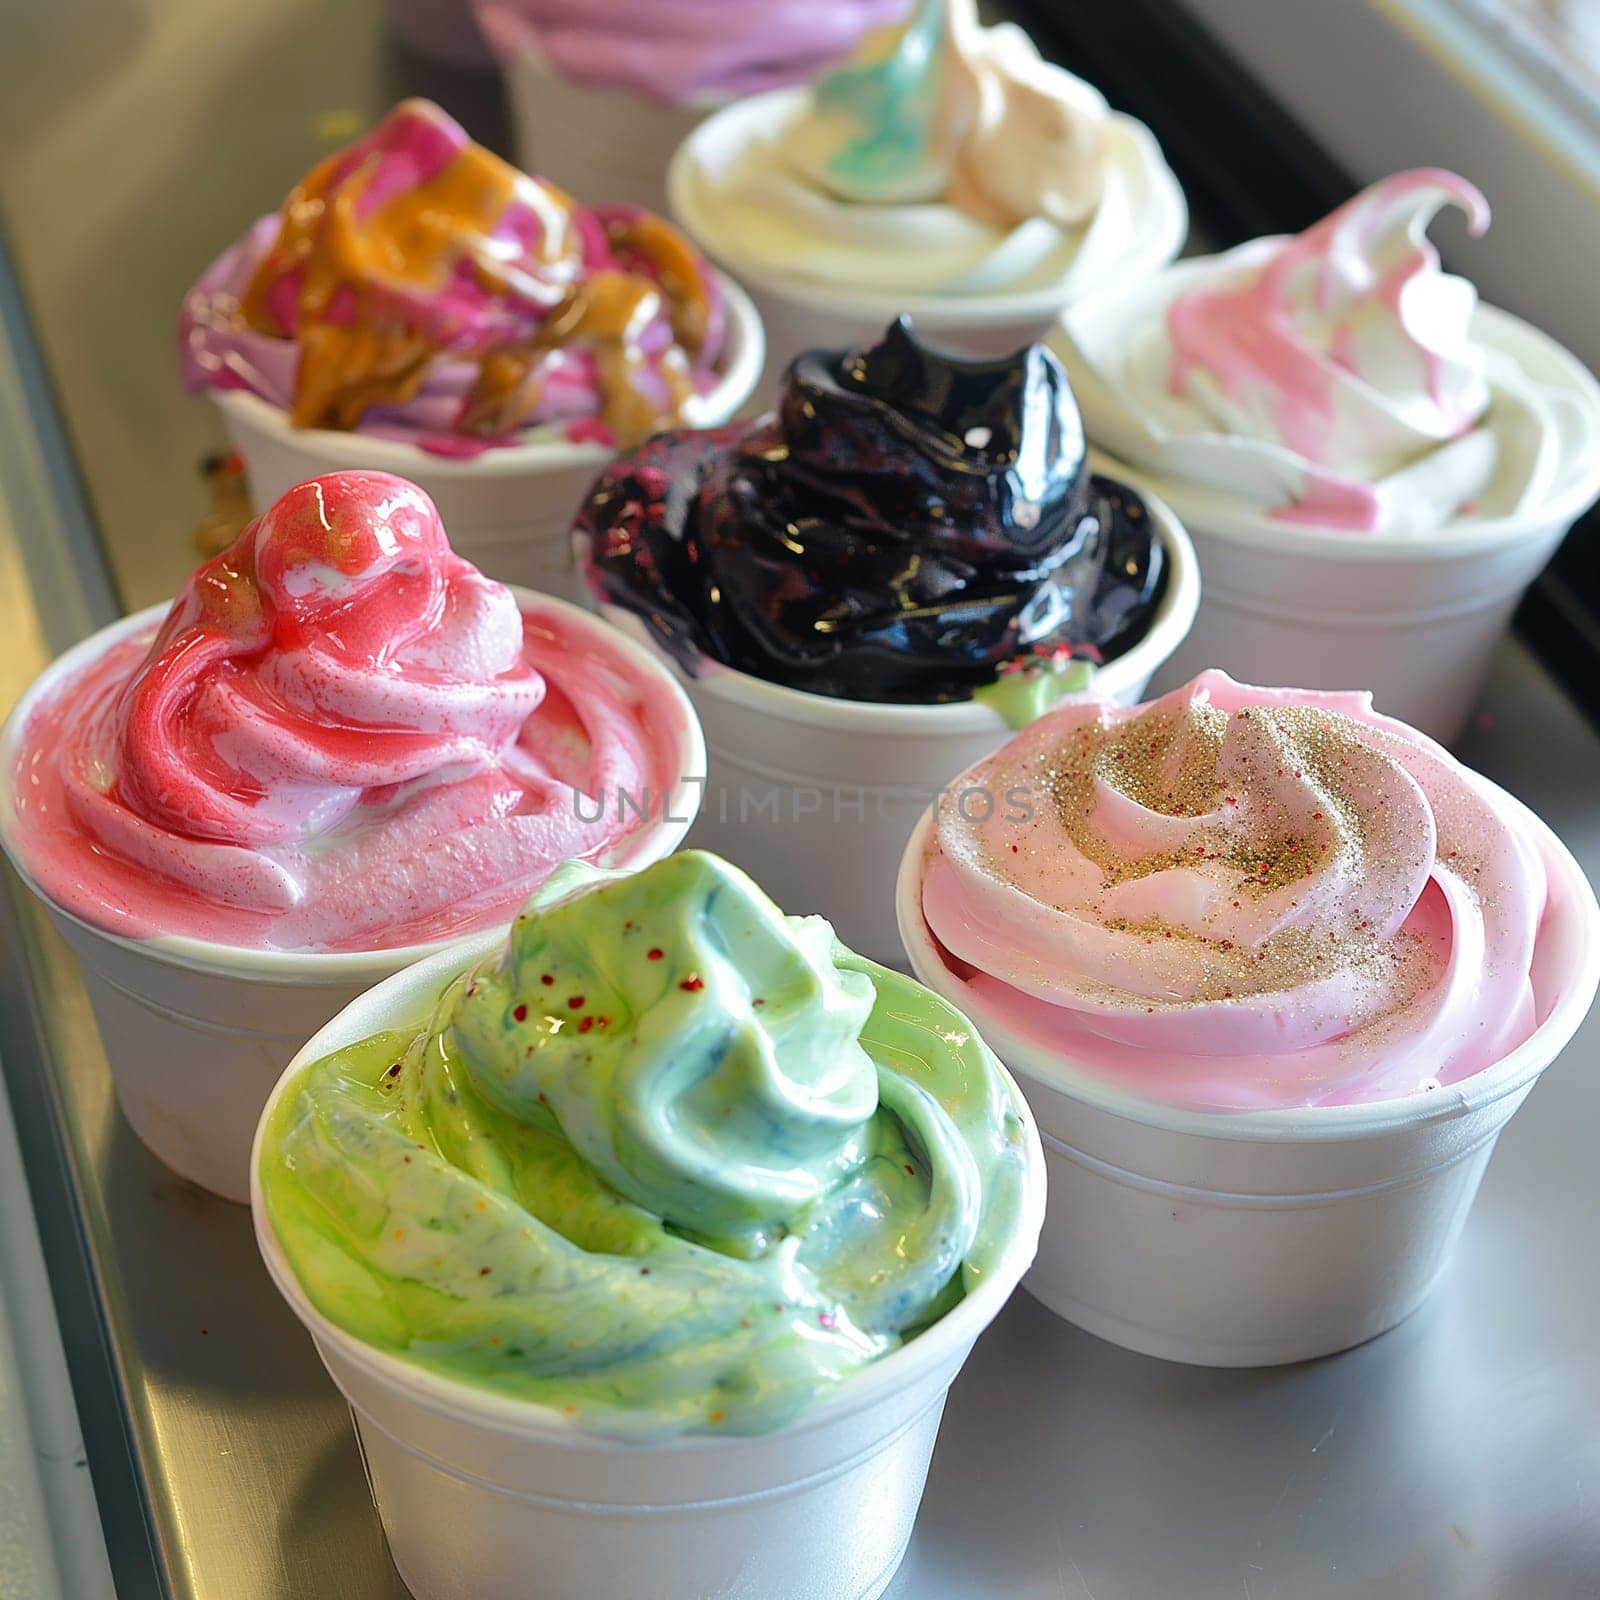 Assorted colorful soft serve ice creams in cups by Hype2art